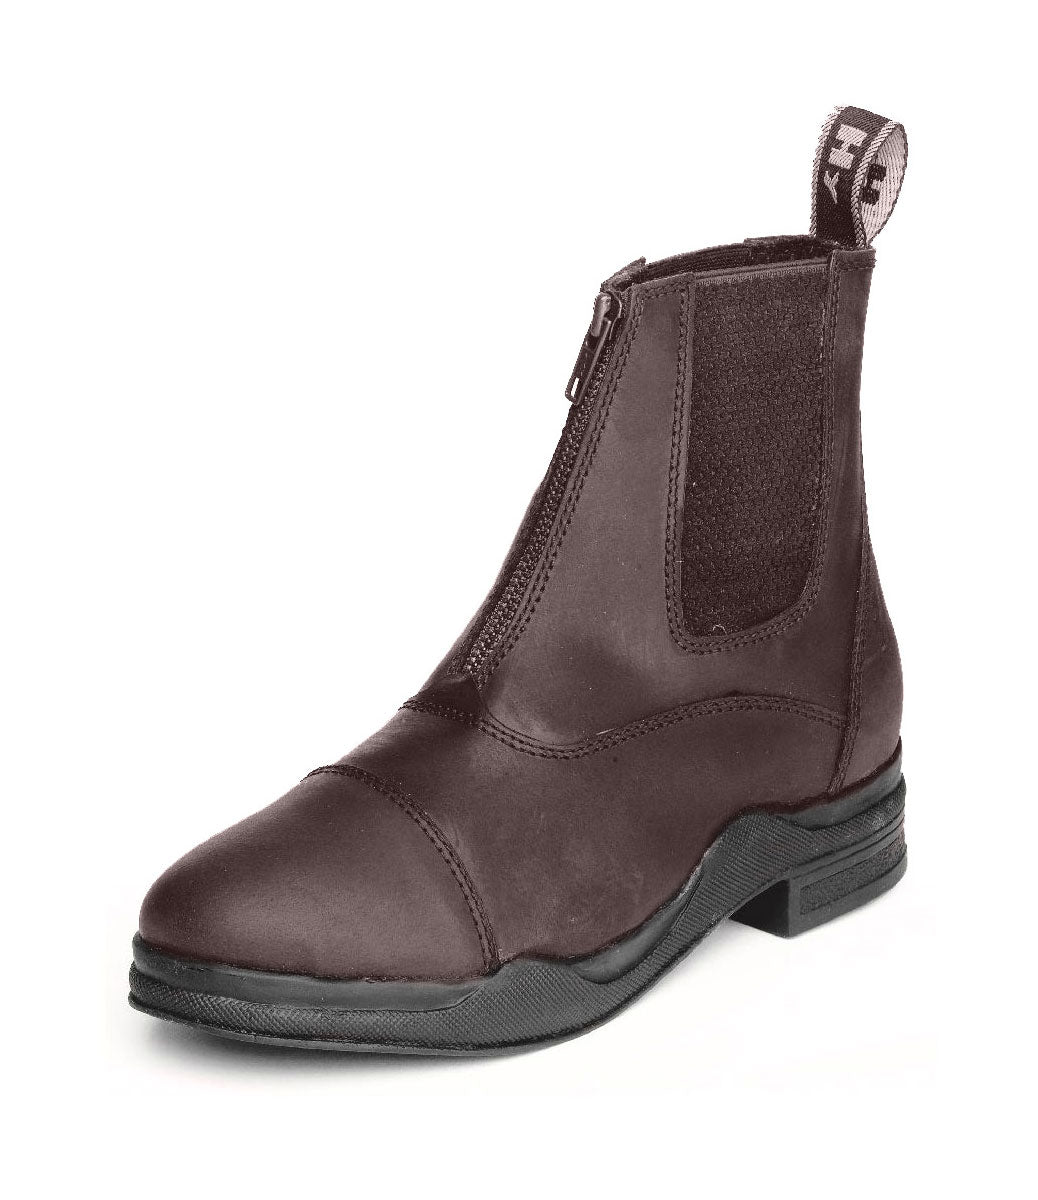 Hy Equestrian Adult Wax Leather Zip Boot Brown Sizes UK 3 To 9 (European 36 To 43)